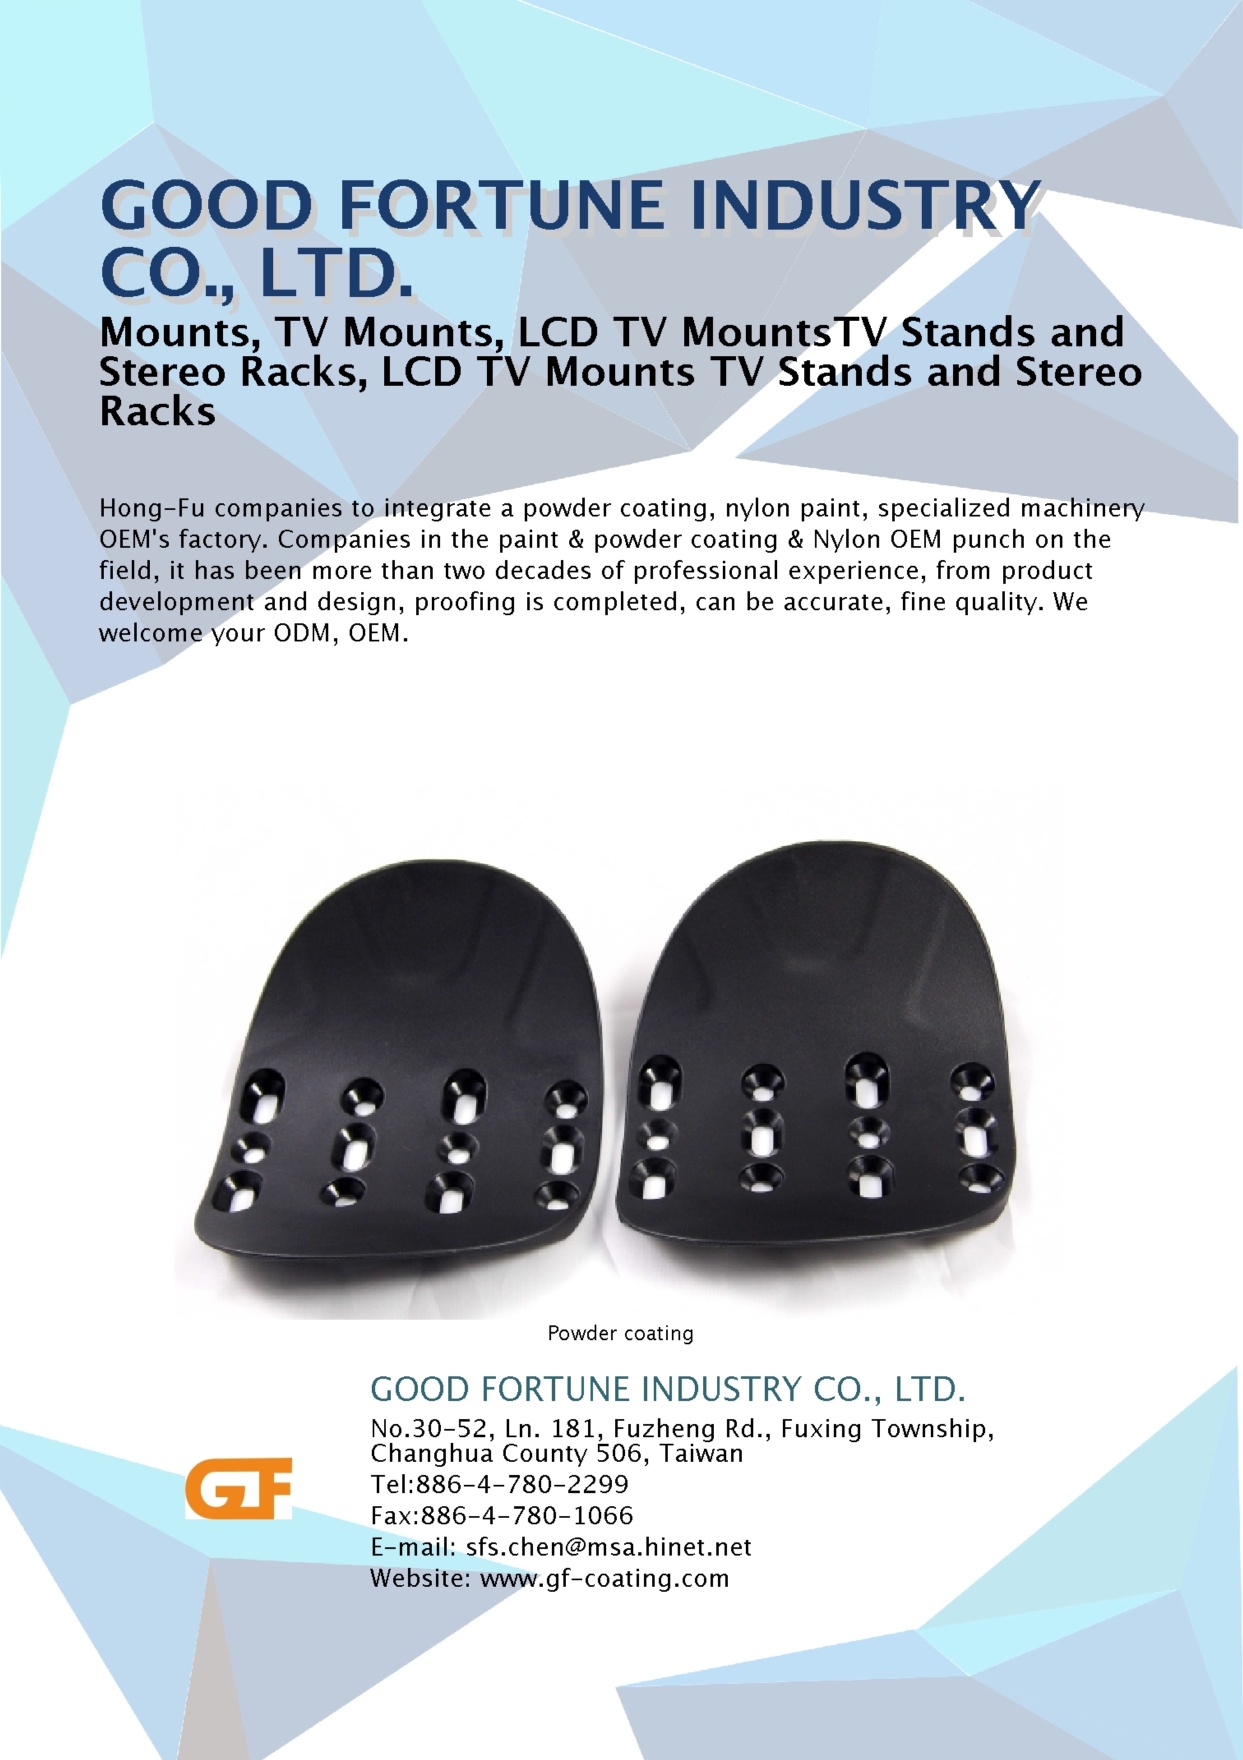 GOOD FORTUNE INDUSTRY CO., LTD.